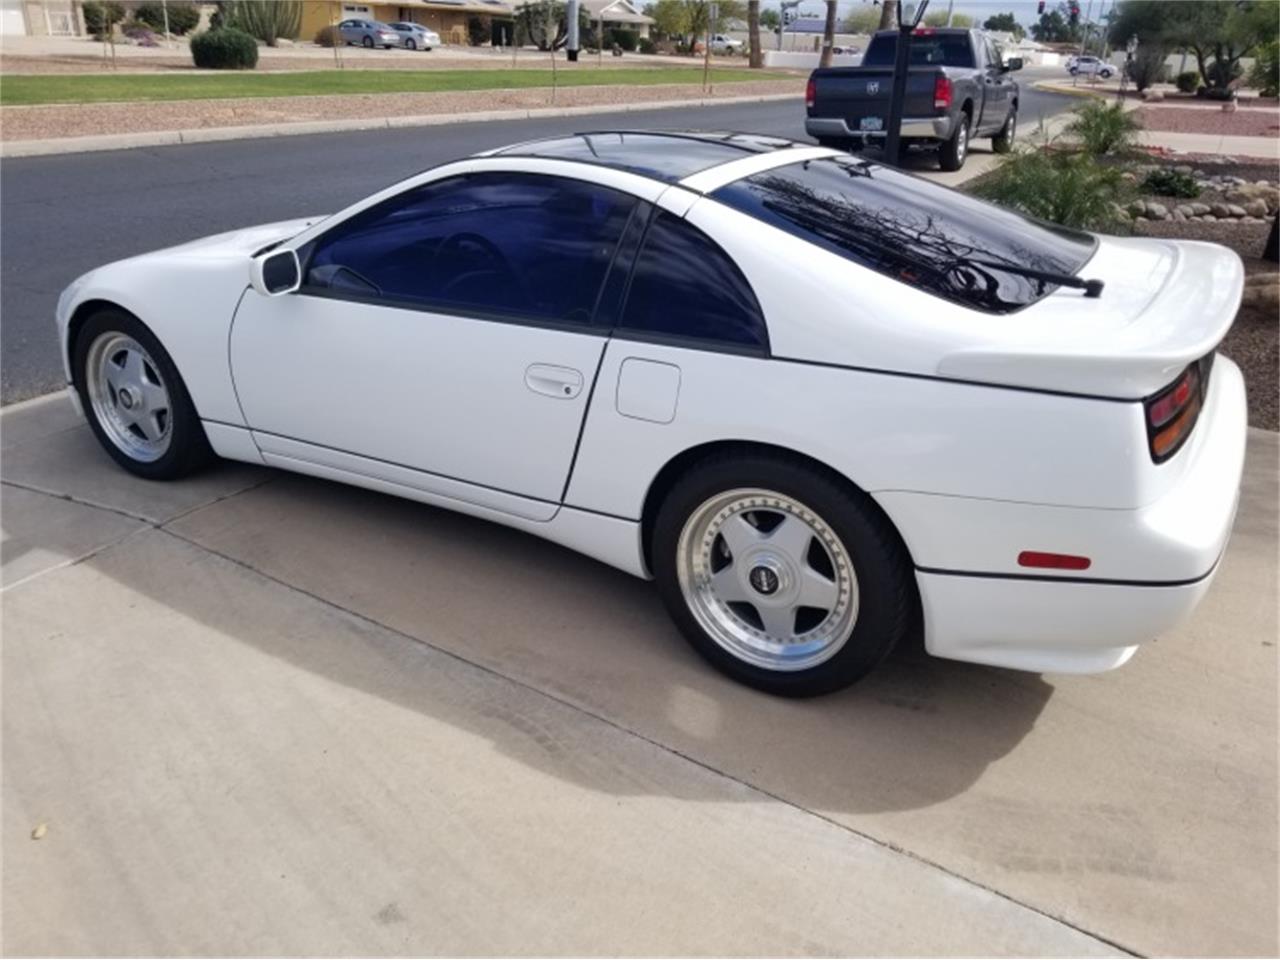 For Sale at Auction: 1991 Nissan 300ZX for sale in Peoria, AZ